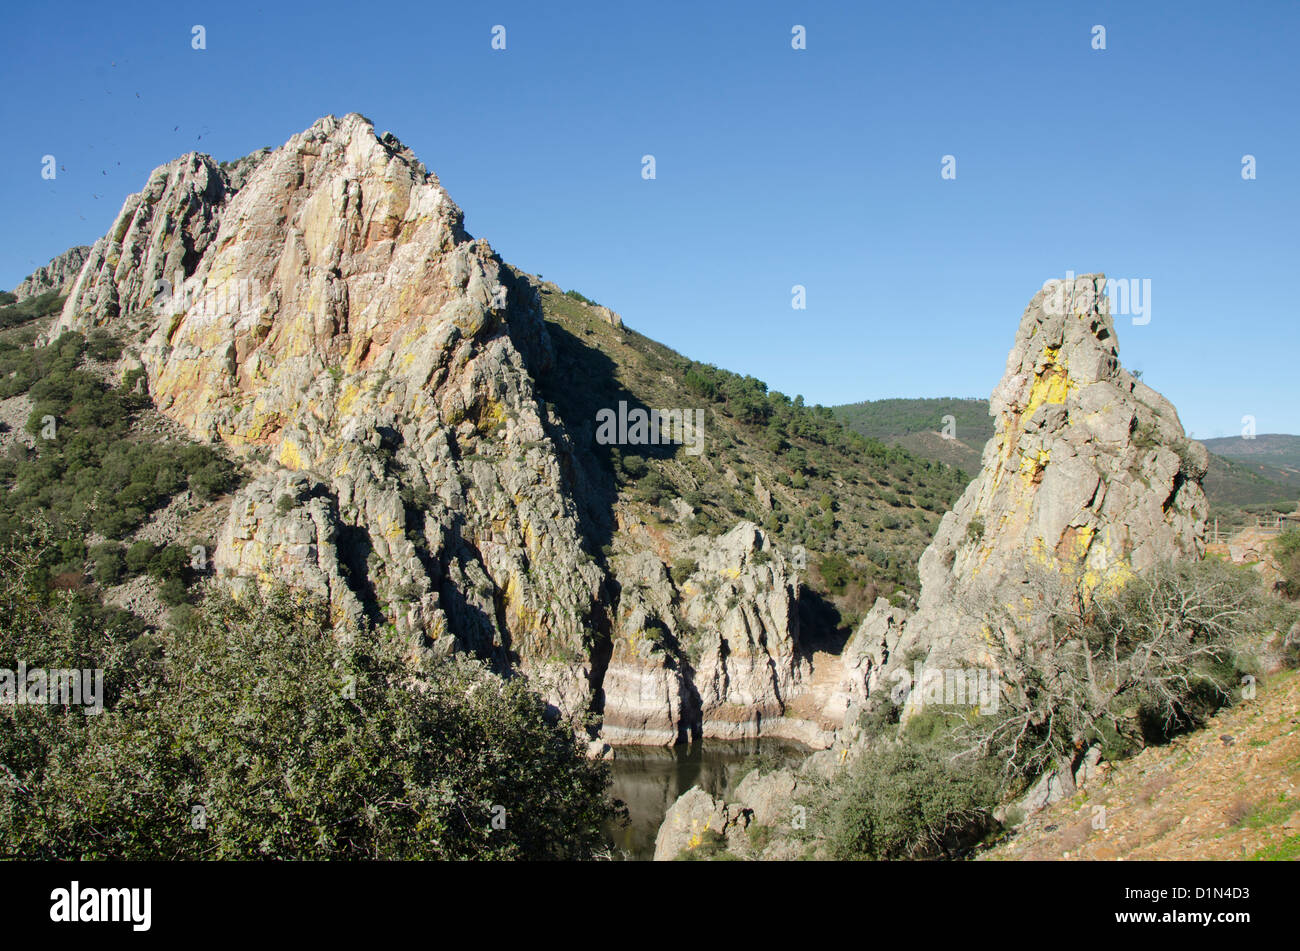 Penafalcon Cliff in Monfrague National Park, Extremadura, Caceres, Spain. Stock Photo